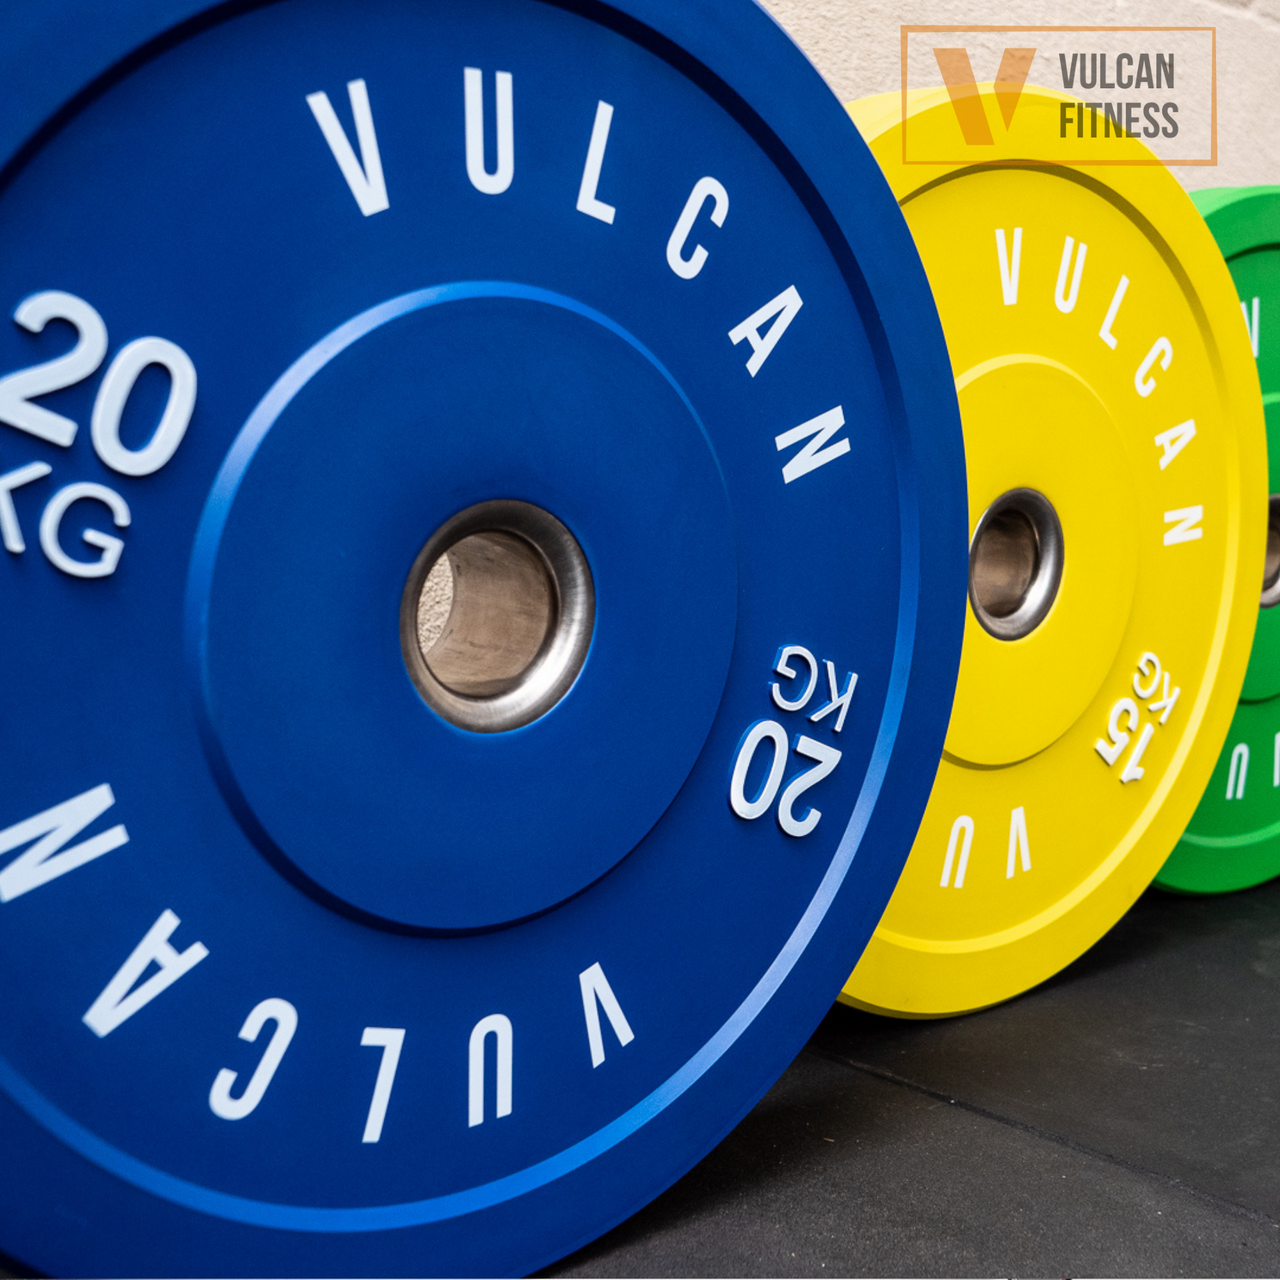 VULCAN Elite Squat Rack, Olympic Barbell, 100kg Colour Bumper Weight Plates & Pro Adjustable Bench | PRE-ORDER MID-LATE FEBRUARY